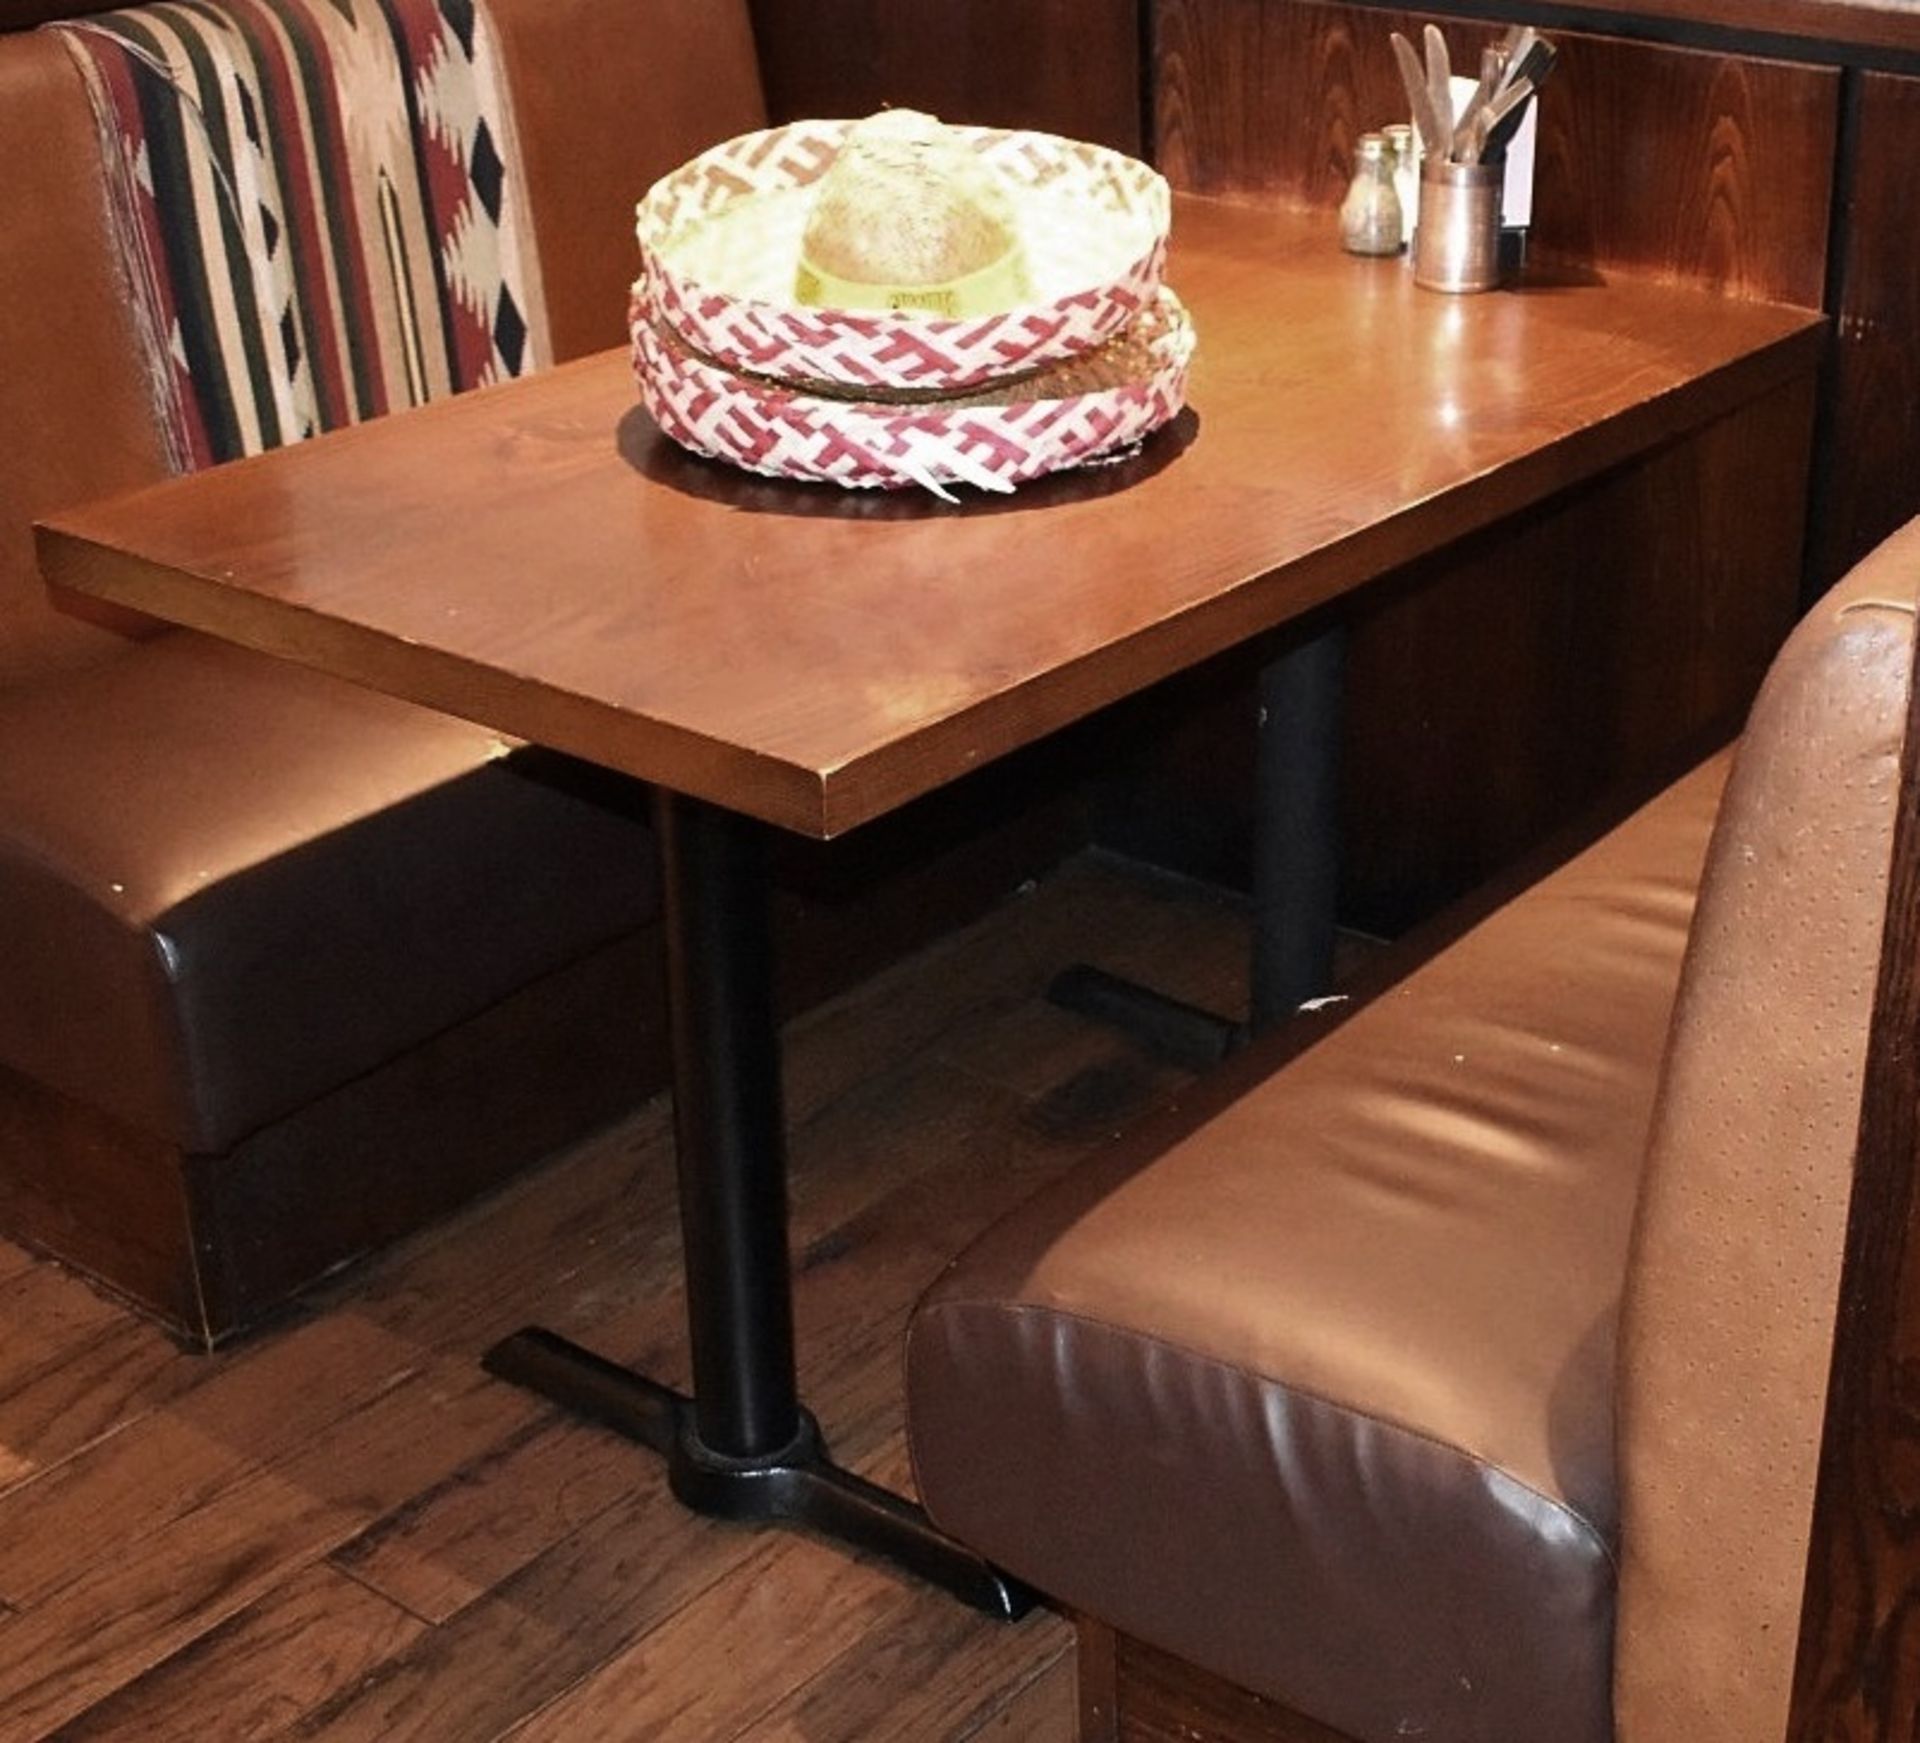 1 x Long Restaurant Dining Table With A Dark Wooden Top And Cast Iron Base - Image 2 of 3